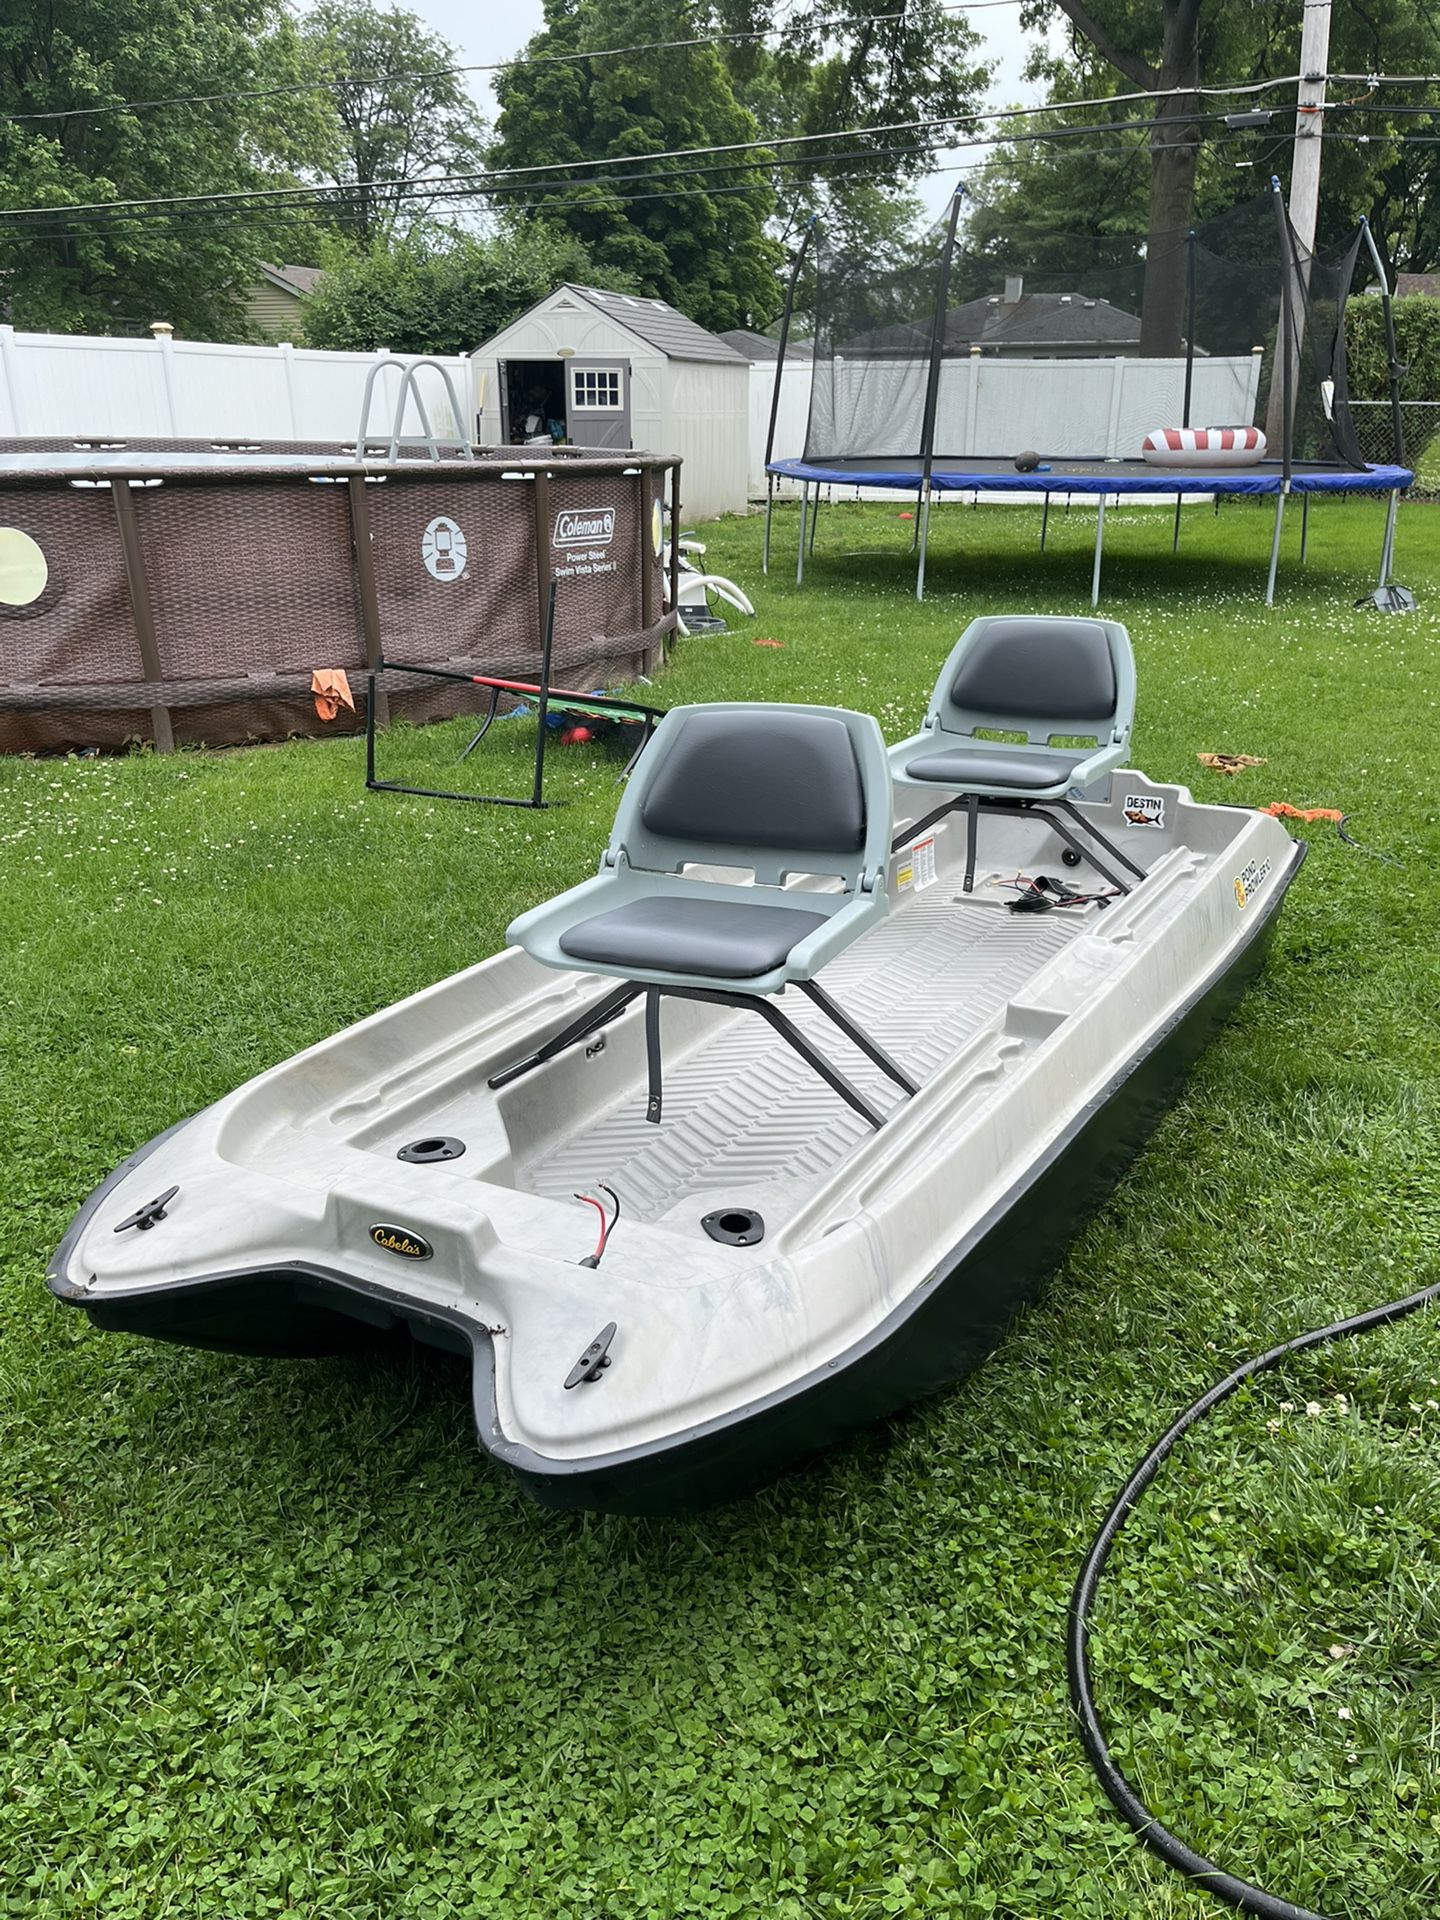 2020 Pond prowler Jon boat for Sale in Rolling Meadows, IL - OfferUp